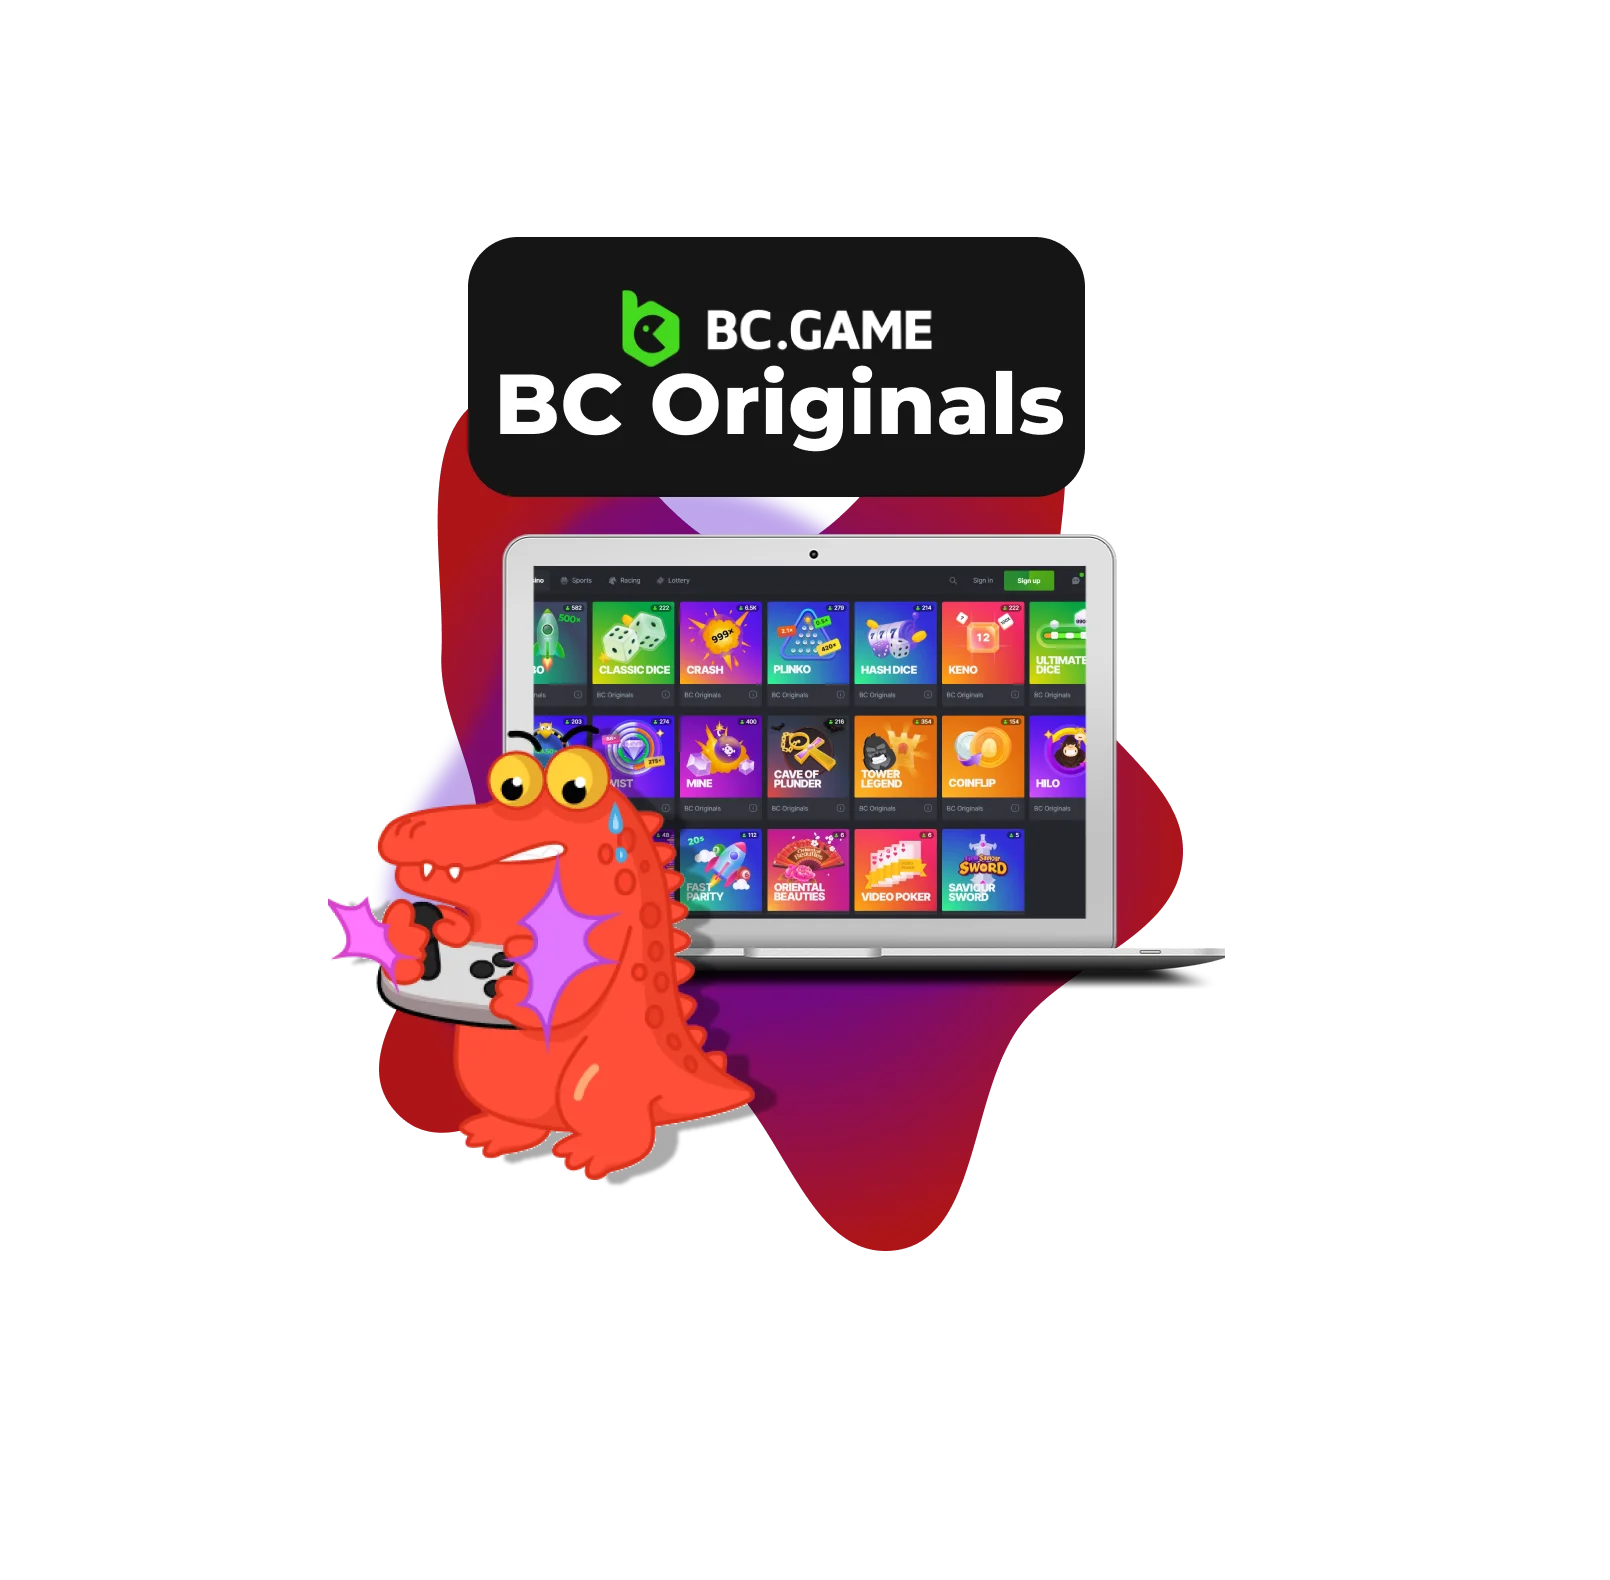 BC Originals banner for Iran, highlighting unique and exclusive BC.Game games with attractive graphics and exciting gameplay.